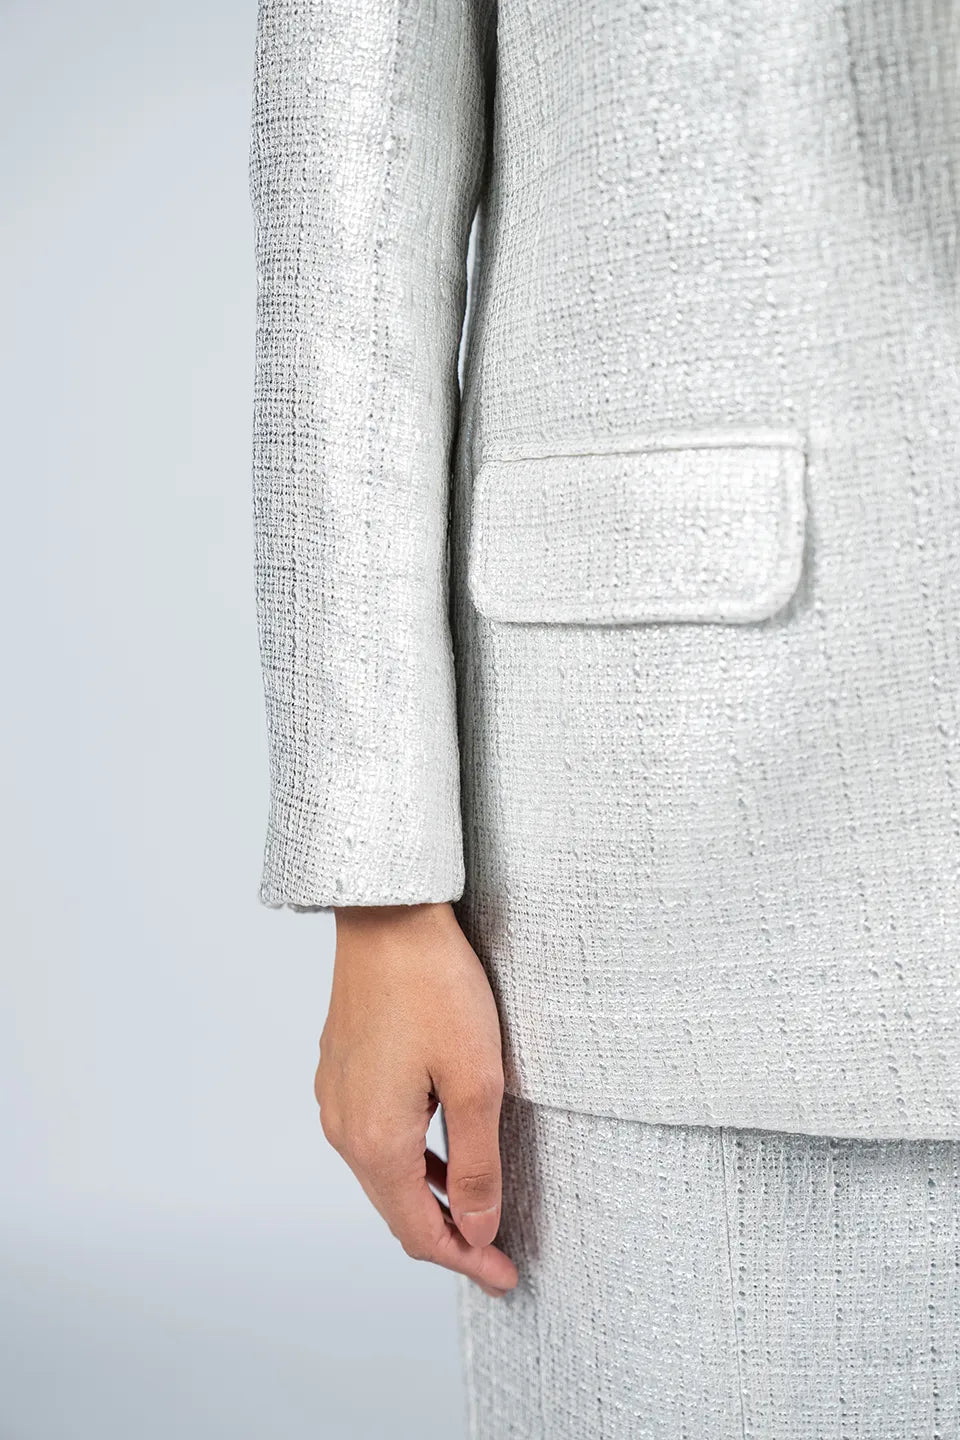 Designer Silver Women blazers, Jacket, shop online with free delivery in UAE. Product gallery 7